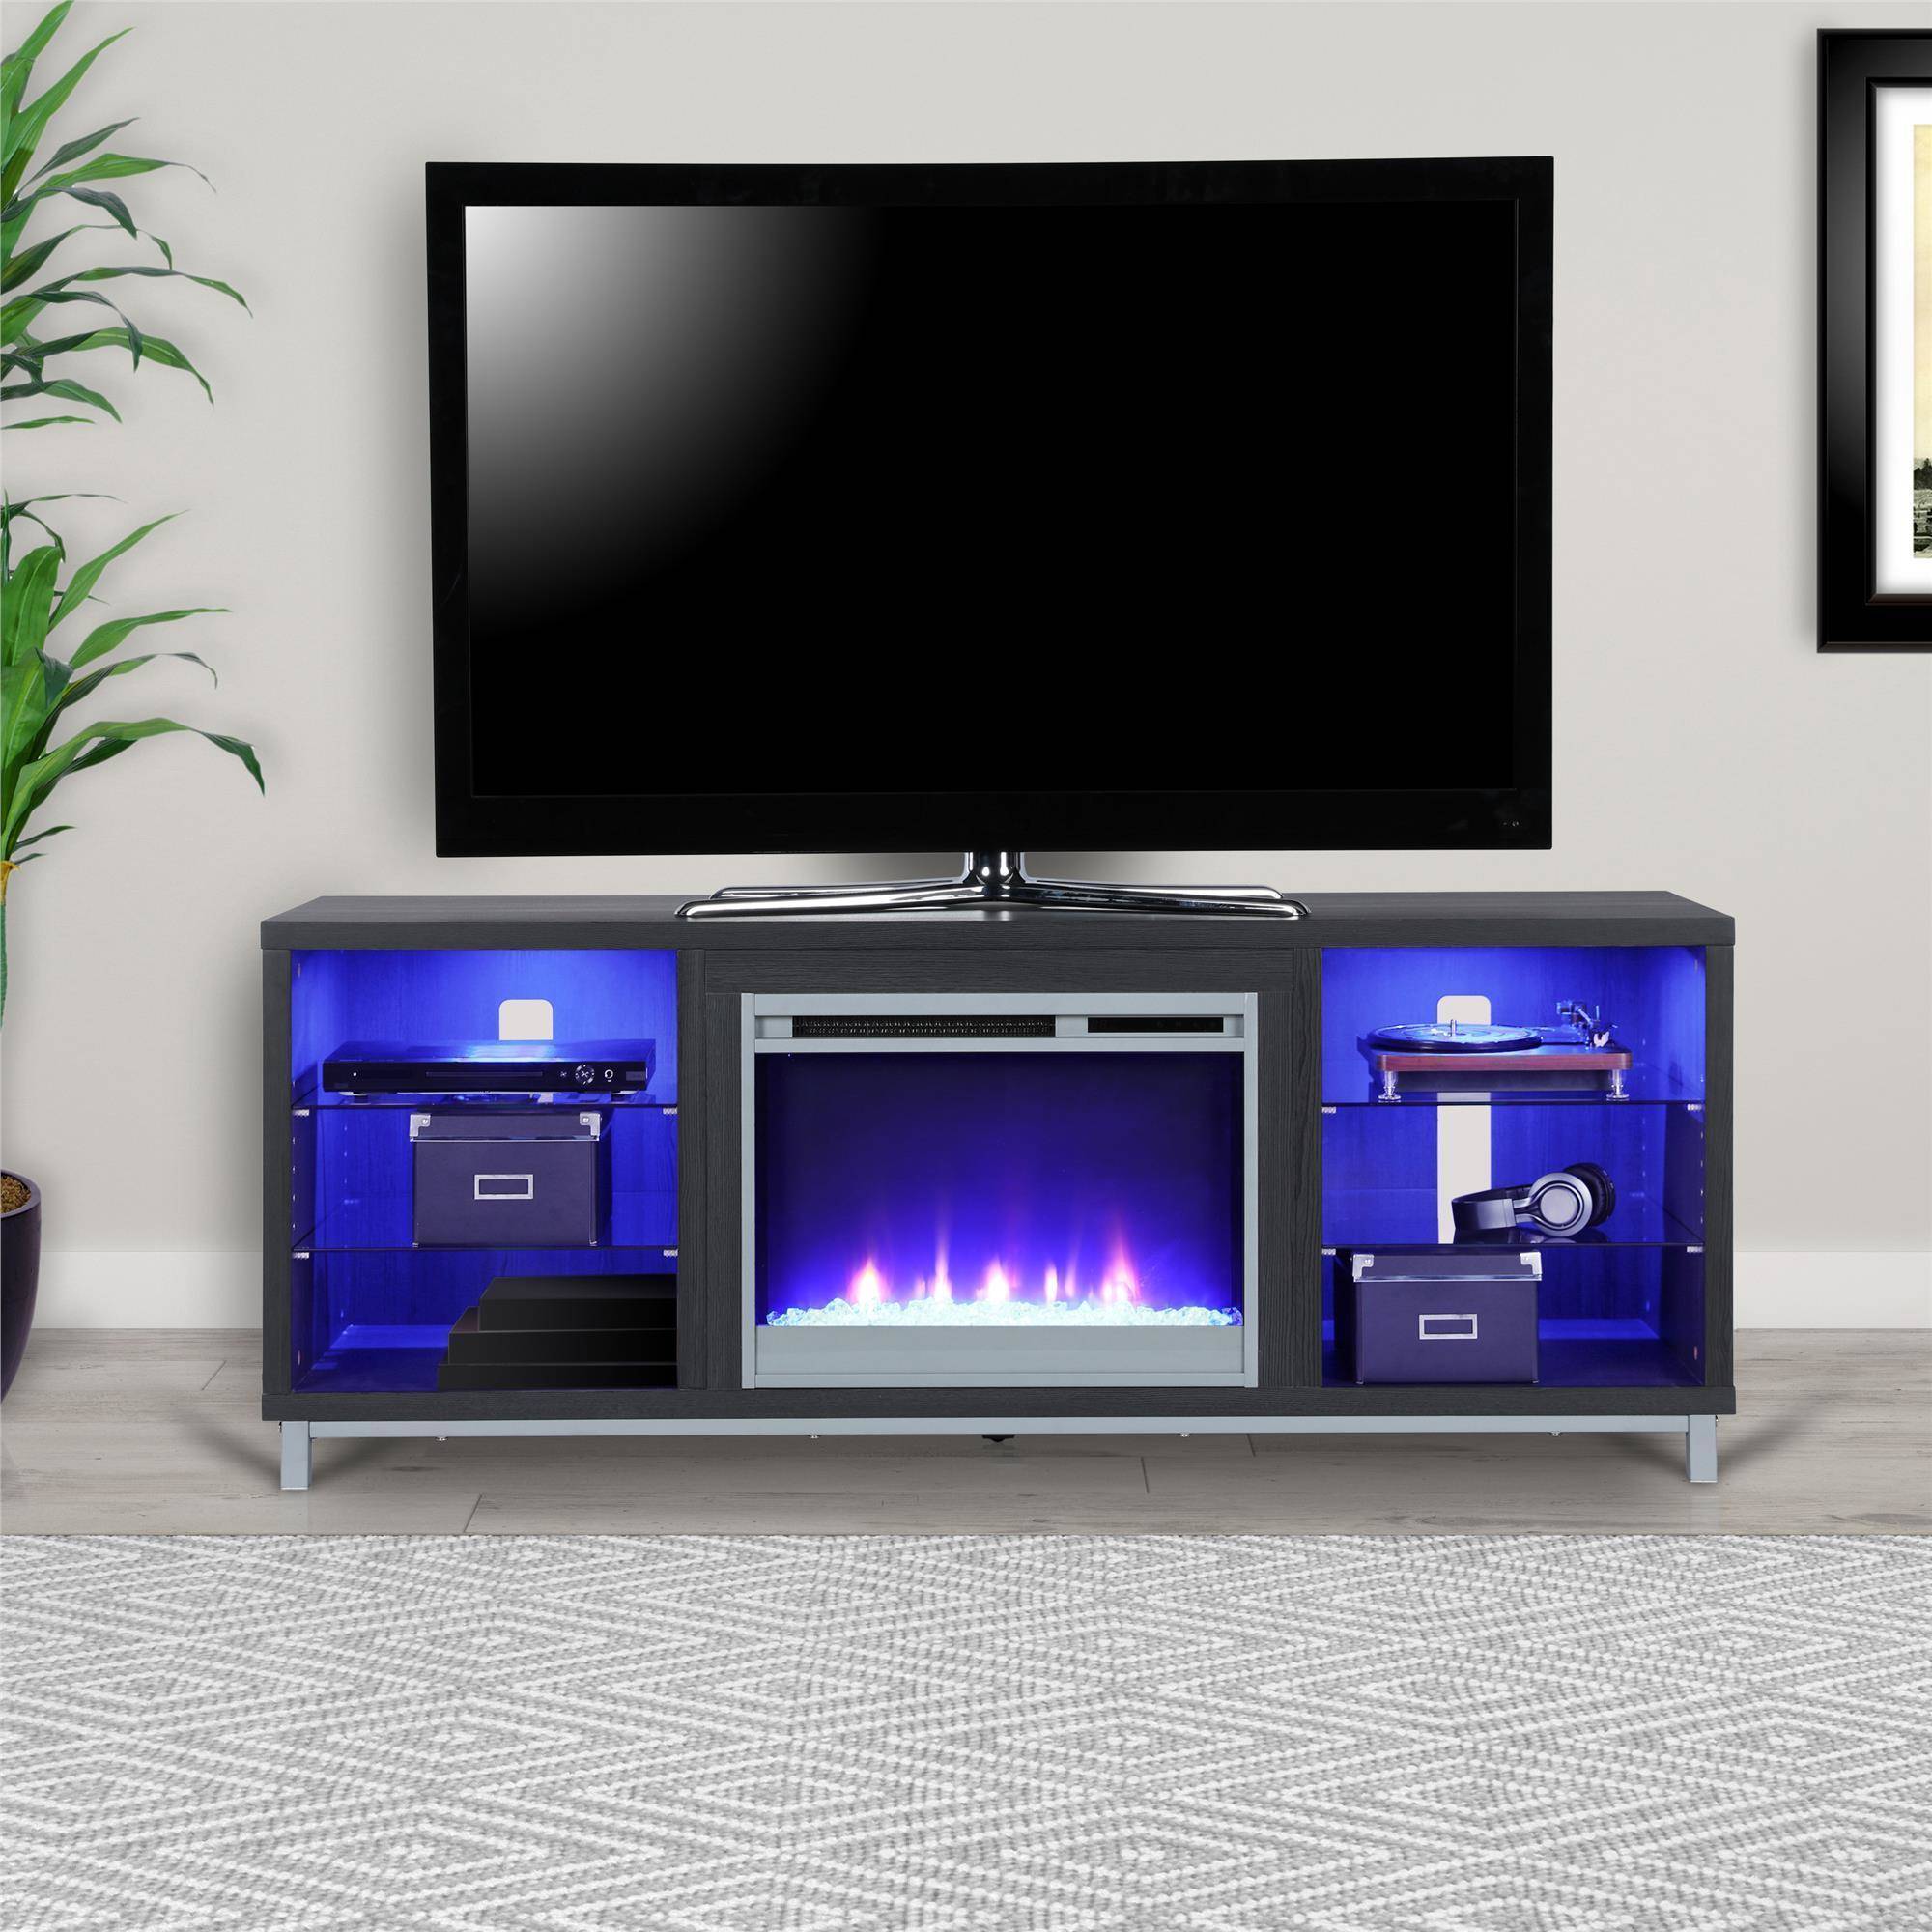 Value City Tv Stand with Fireplace Elegant Ameriwood Home Lumina Fireplace Tv Stand for Tvs Up to 70" Wide Black Oak Walmart